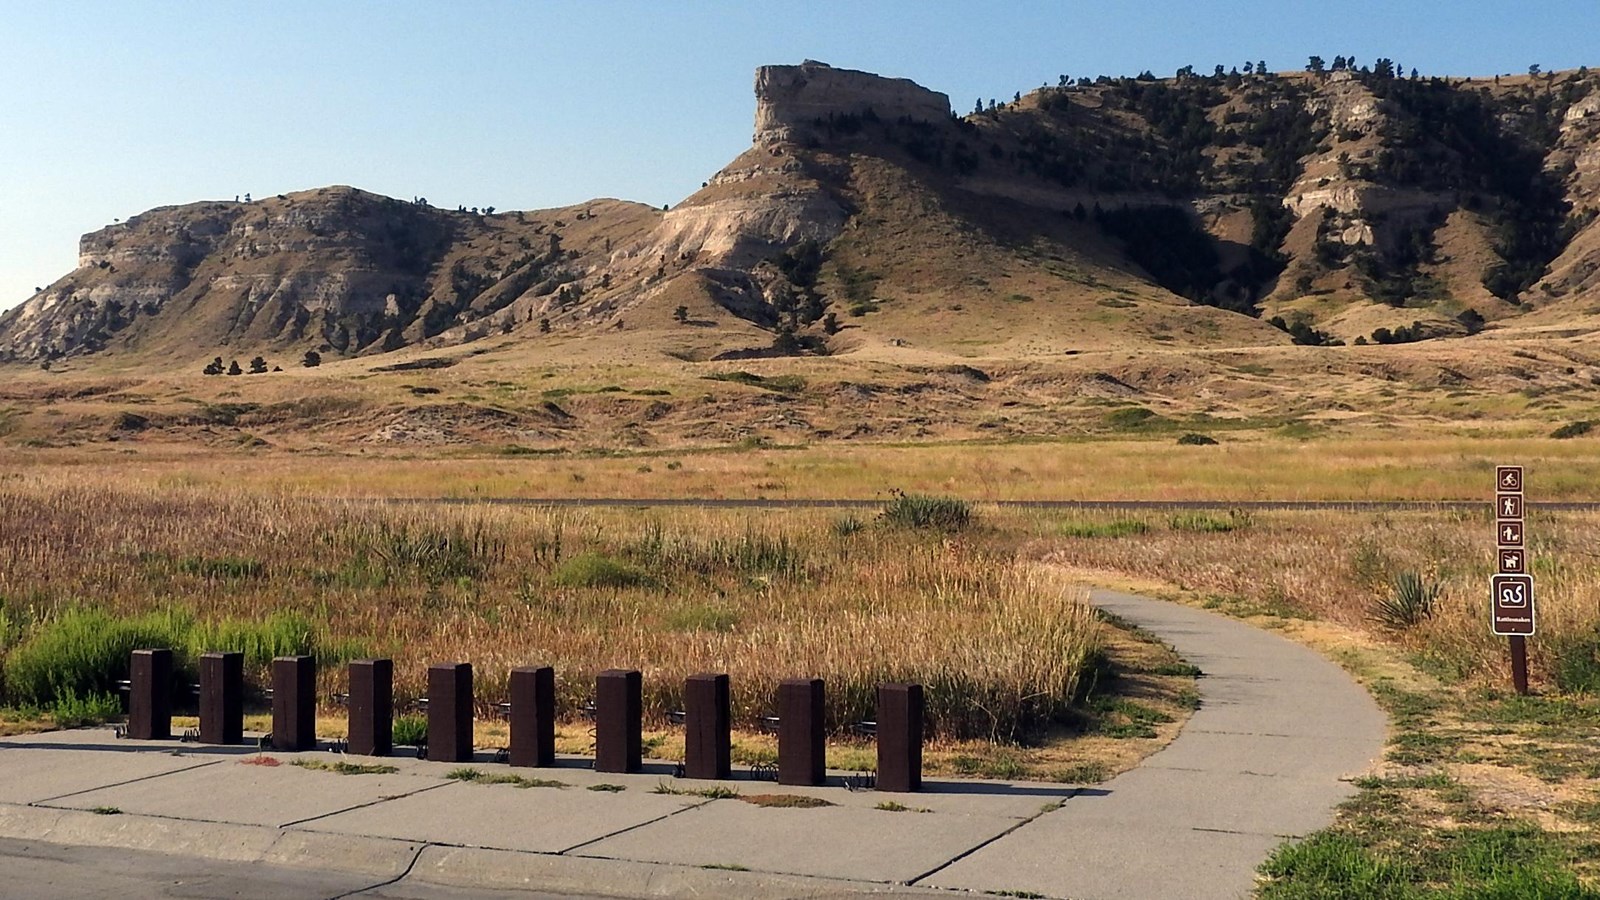 A bicycle rack is seen to the right of a concrete trail with rock formations in the background